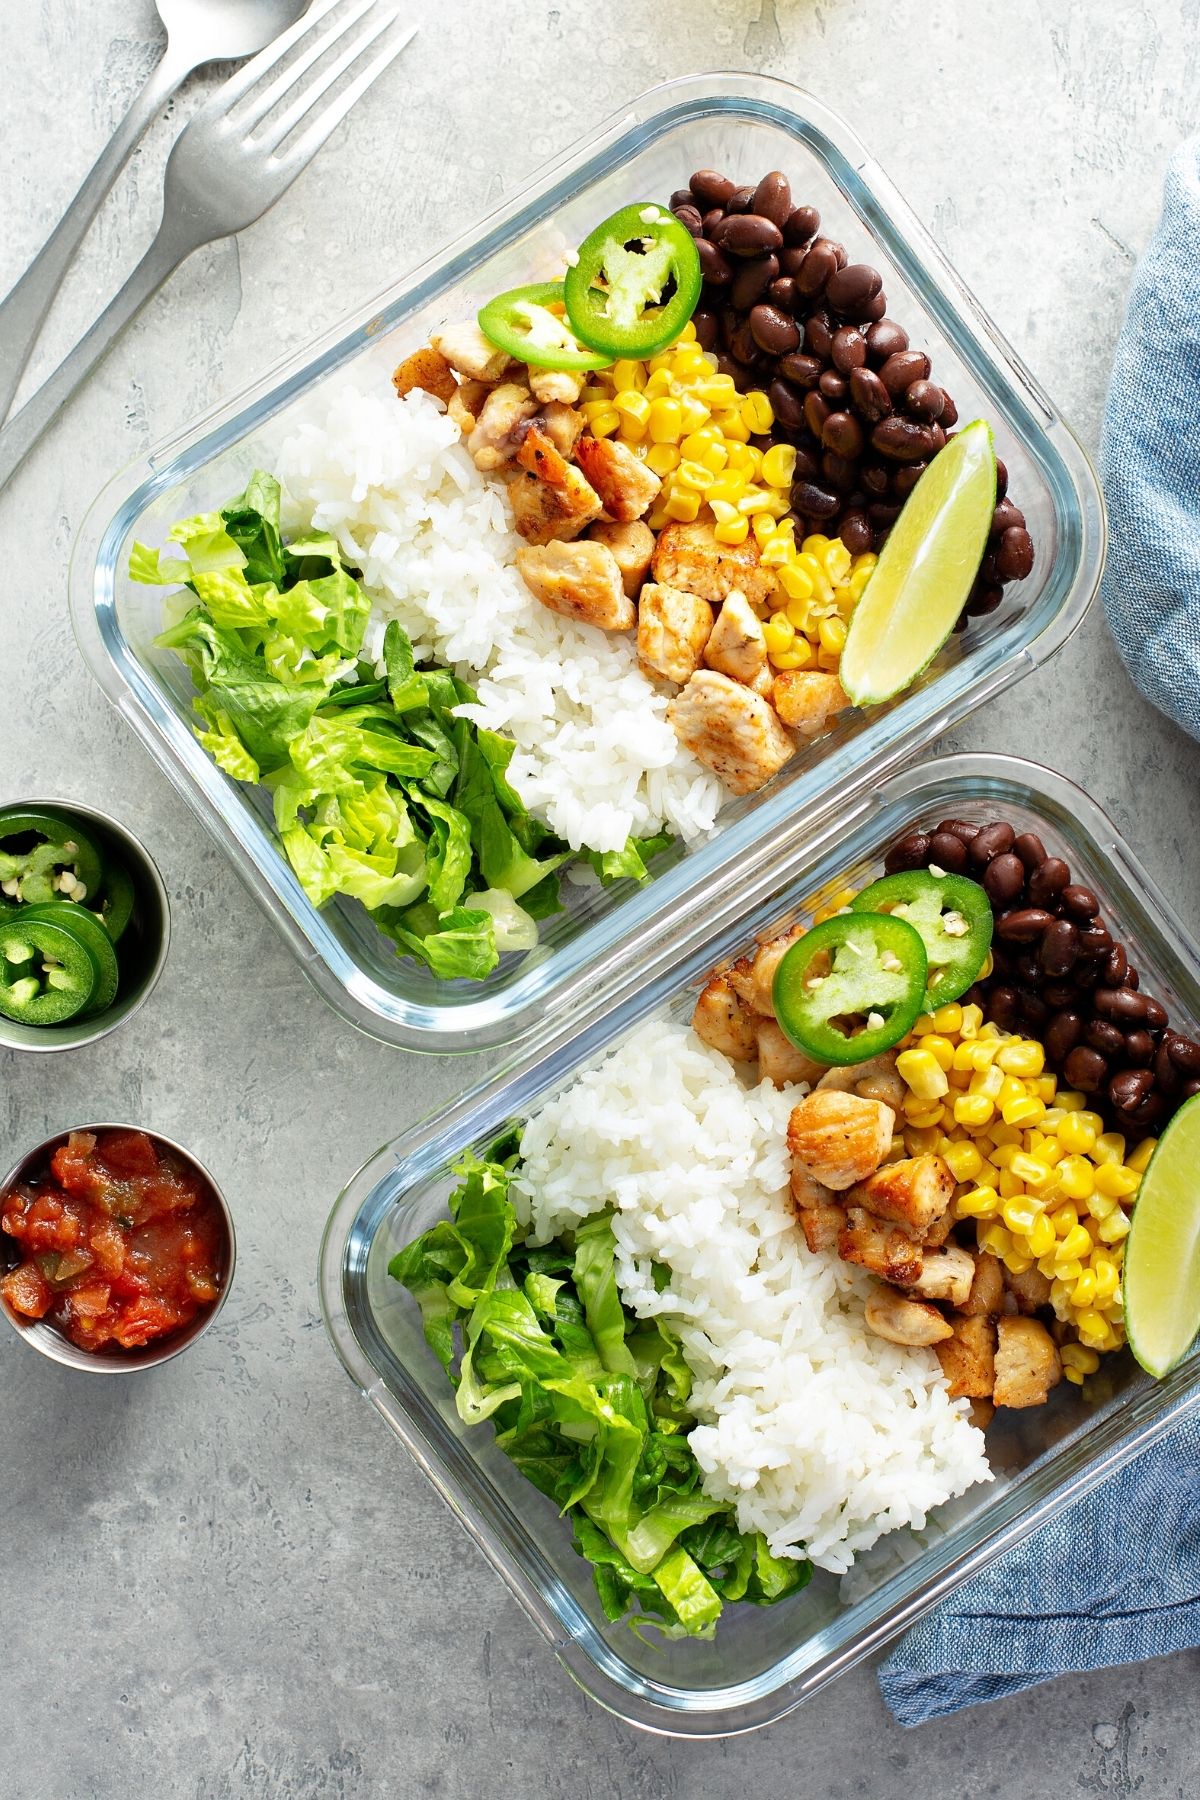 https://www.cleaneatingkitchen.com/wp-content/uploads/2022/03/chicken-and-rice-and-black-bean-meal-prep-2.jpg